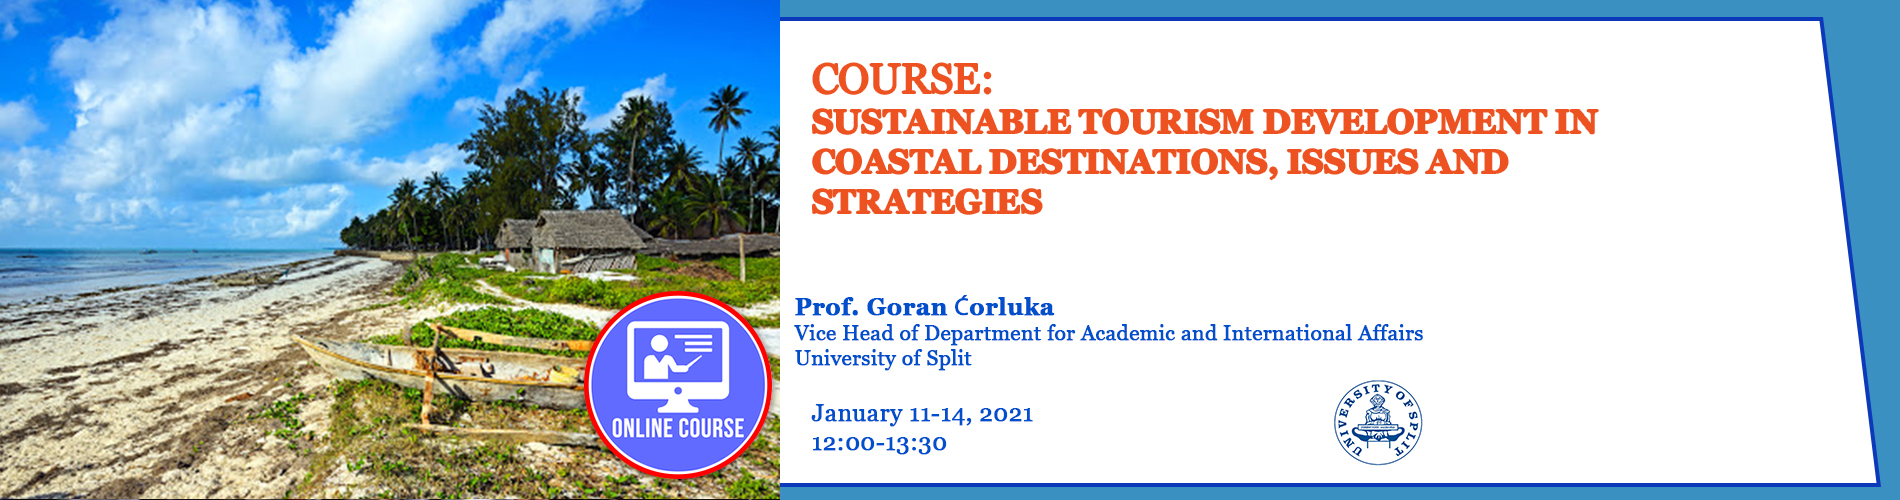 11-14.01.2021--Sustainable Development Coastal Tourism, Issues and Strategies